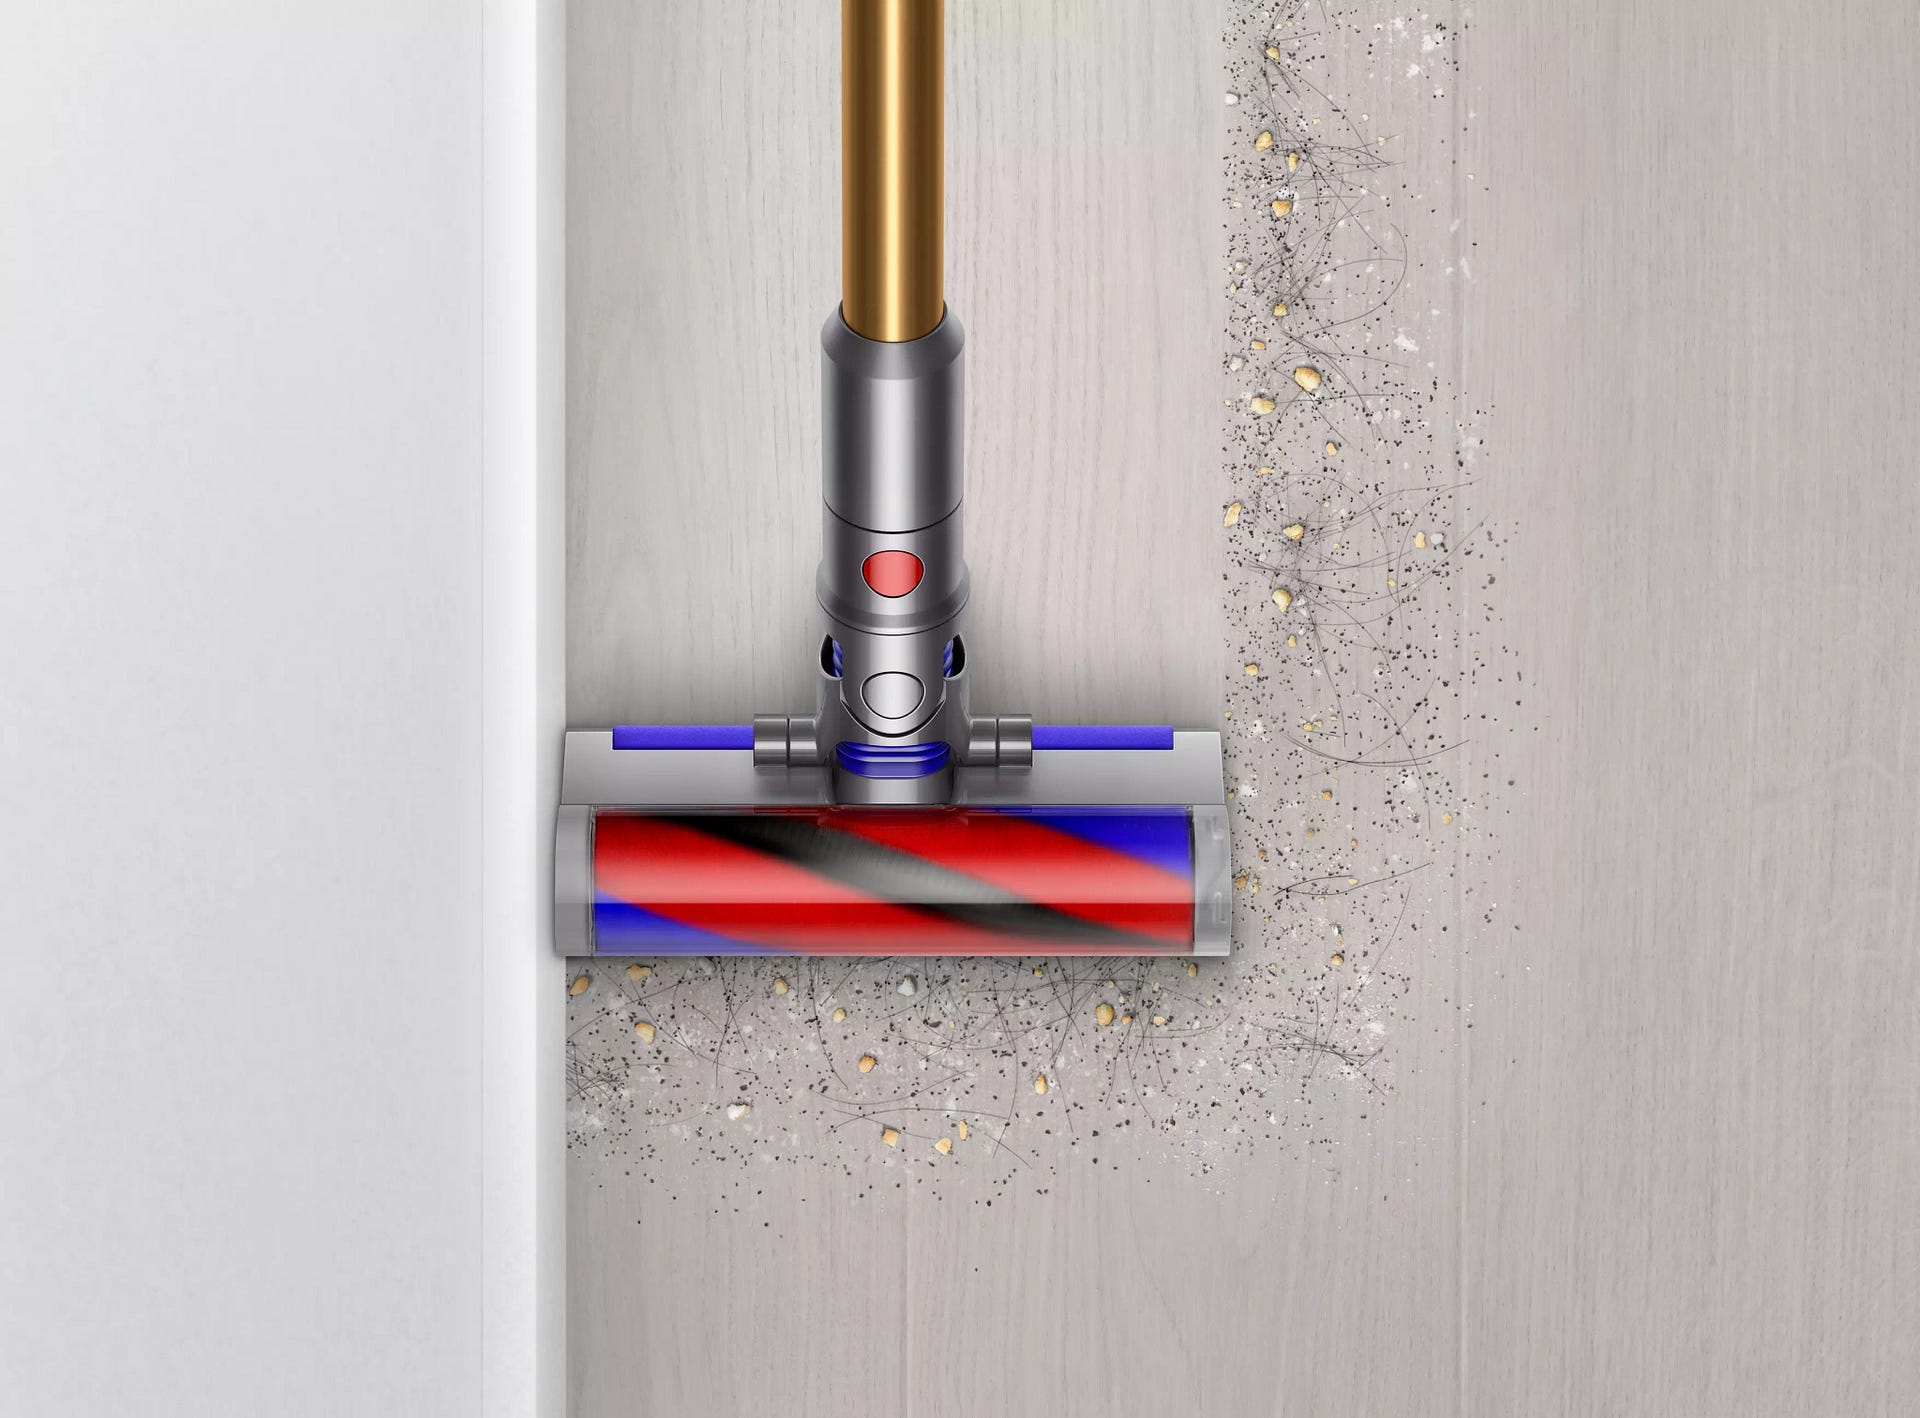 sv21-gldgld-030-rgb-inuse-feature-edgepickup-skirtingboard-microfh-a4-mix.png